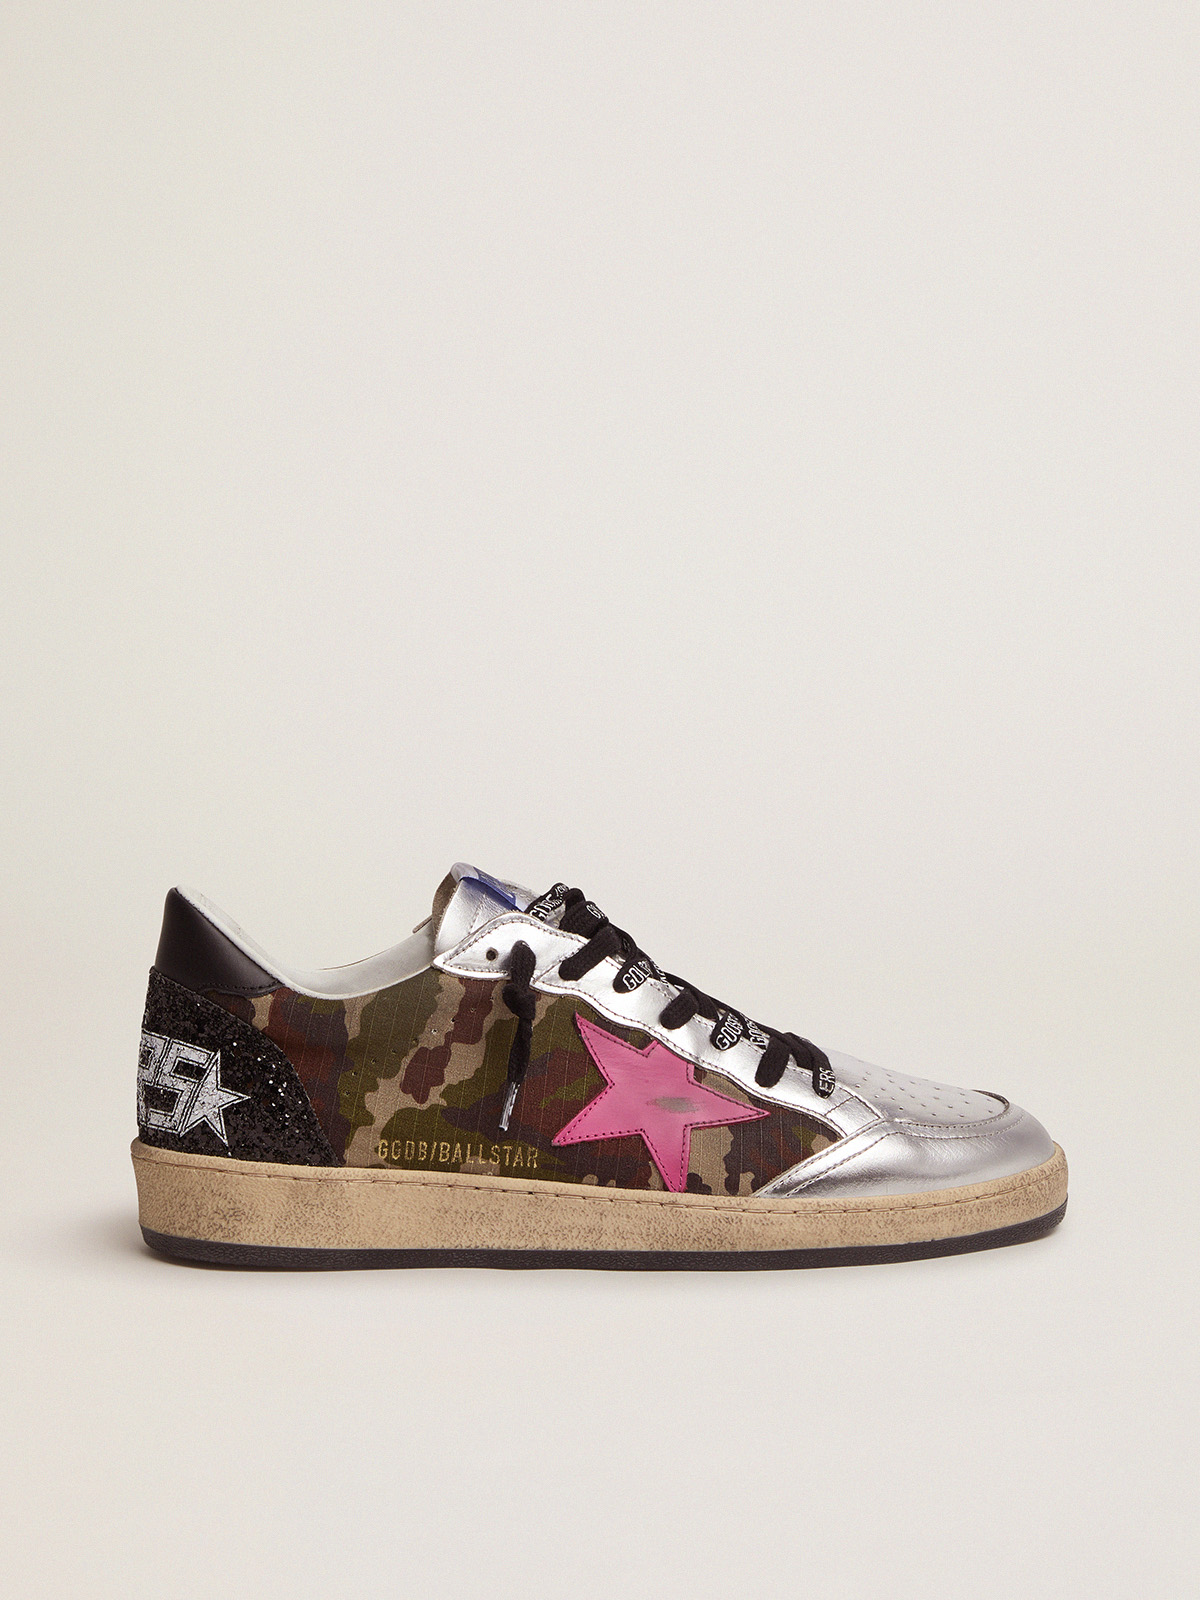 Ball Star LTD sneakers with camouflage print and fuchsia star | Golden Goose